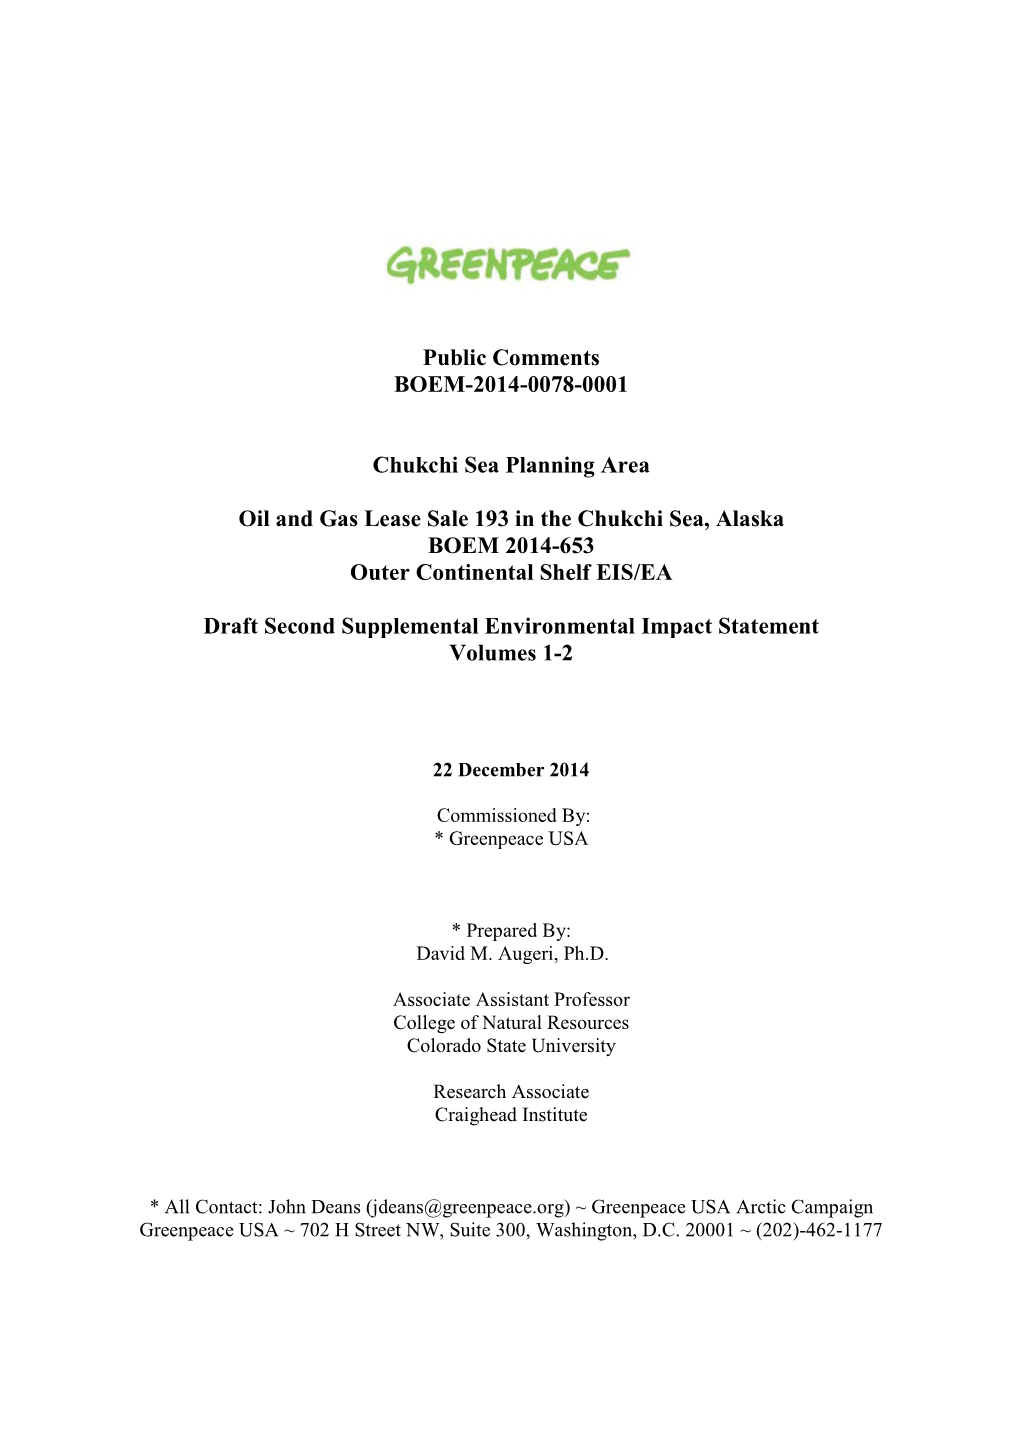 Greenpeace Comments Dec 19 2014 on SSEIS for Lease